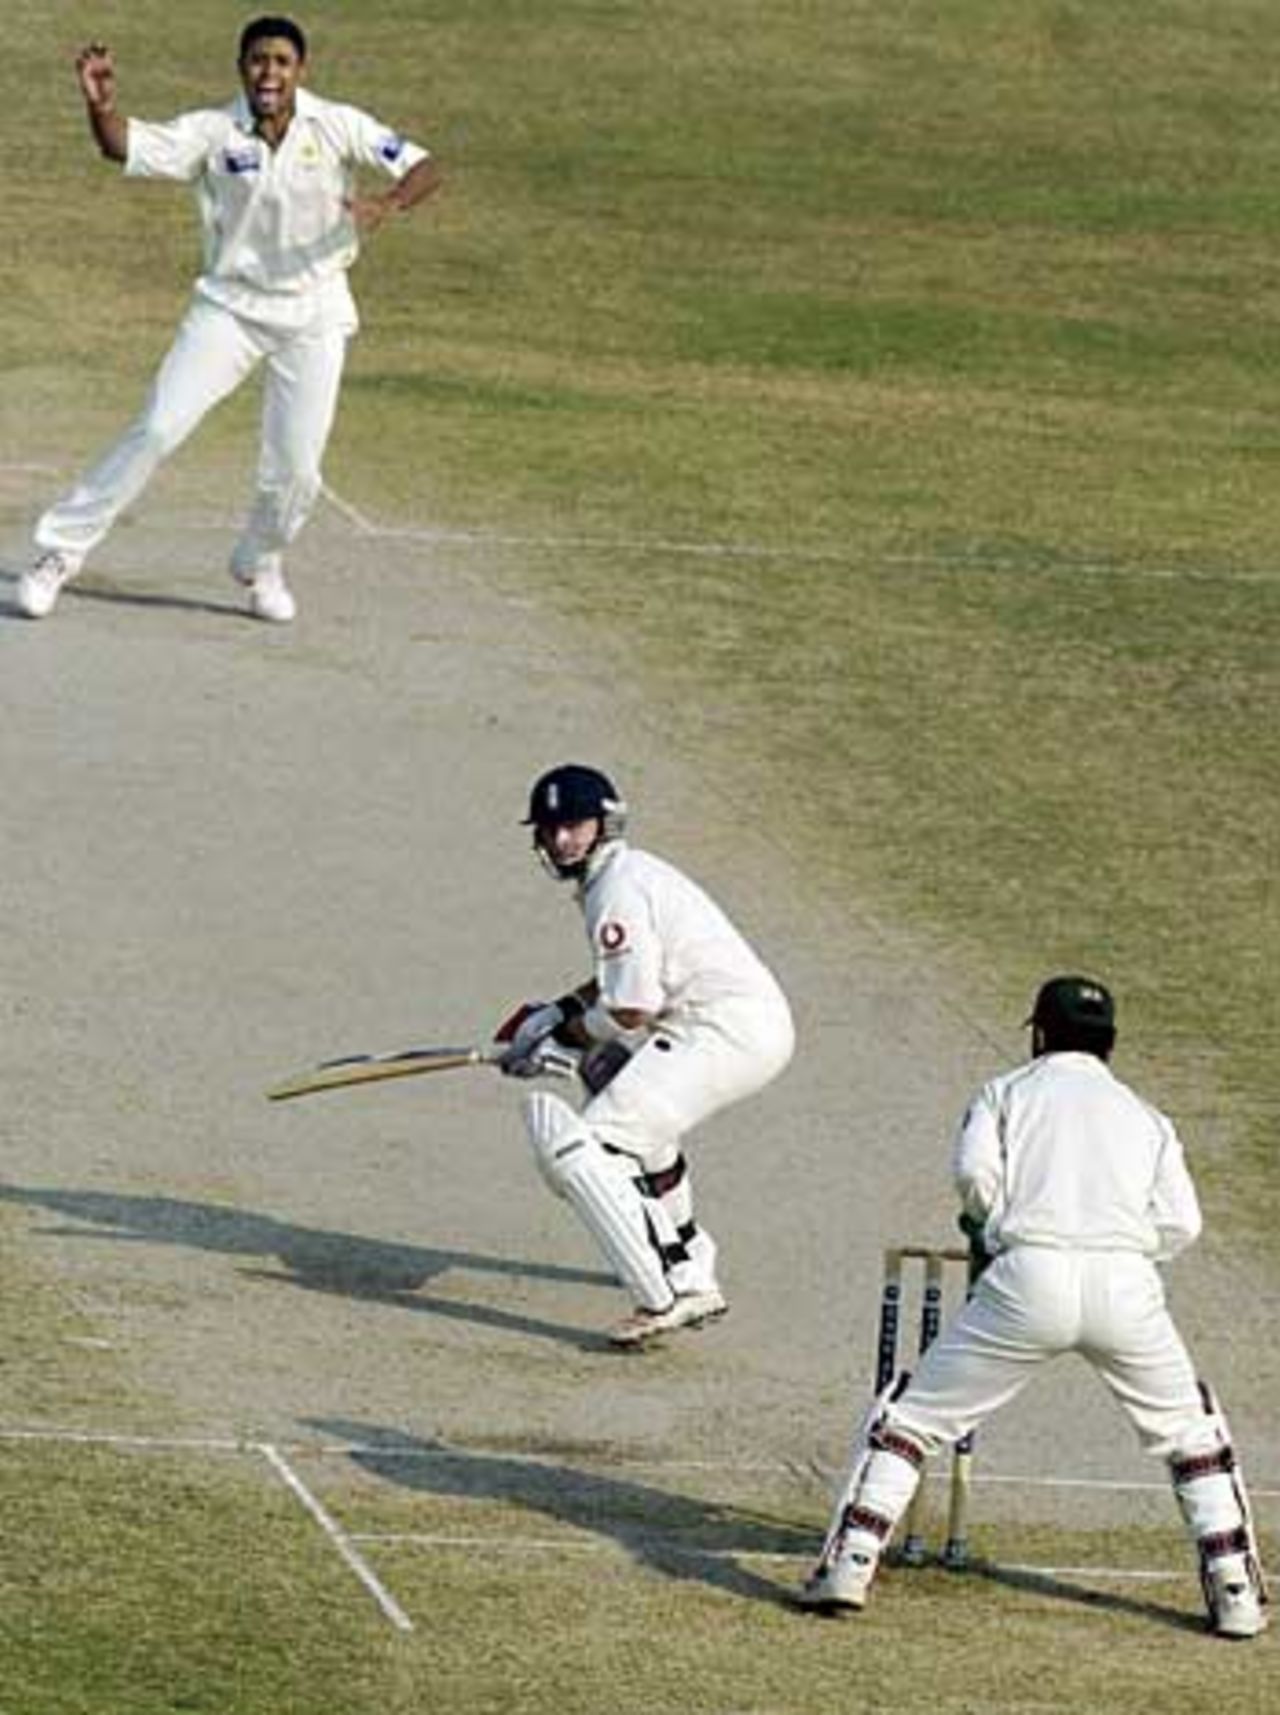 Kamran Akmal misses a stumping against Ian Bell. Pakistan missed four chances on the third day, Pakistan v England, 2nd Test, Faisalabad, November 22, 2005